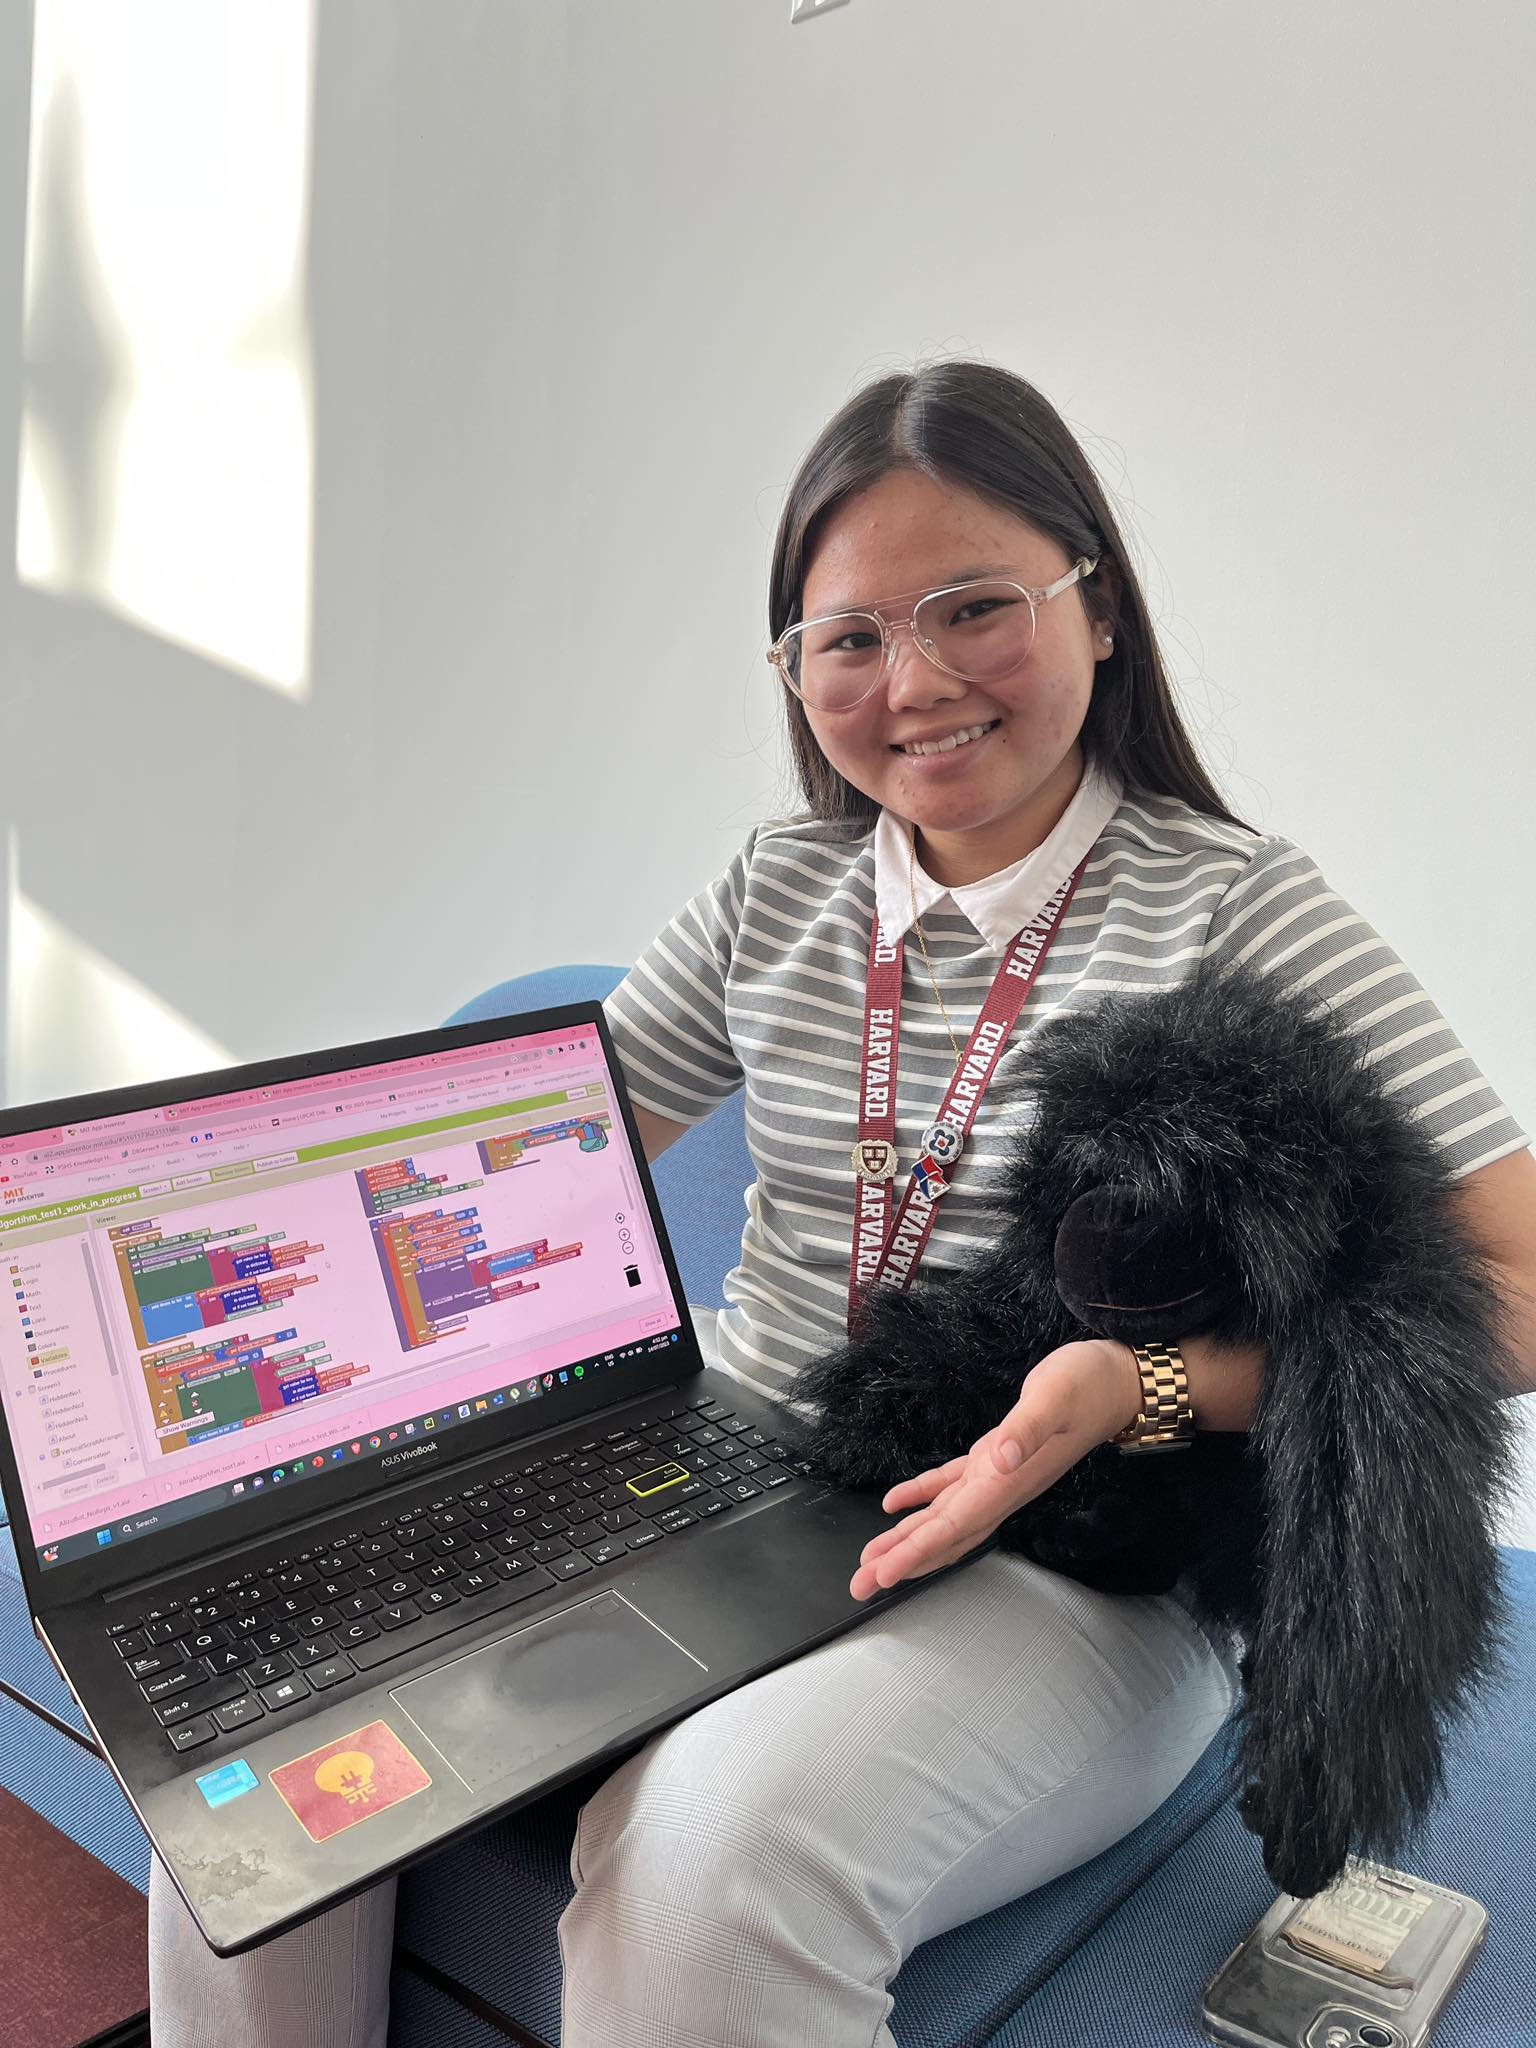  Angel Nicole V. Iniego poses with App Inventor code 